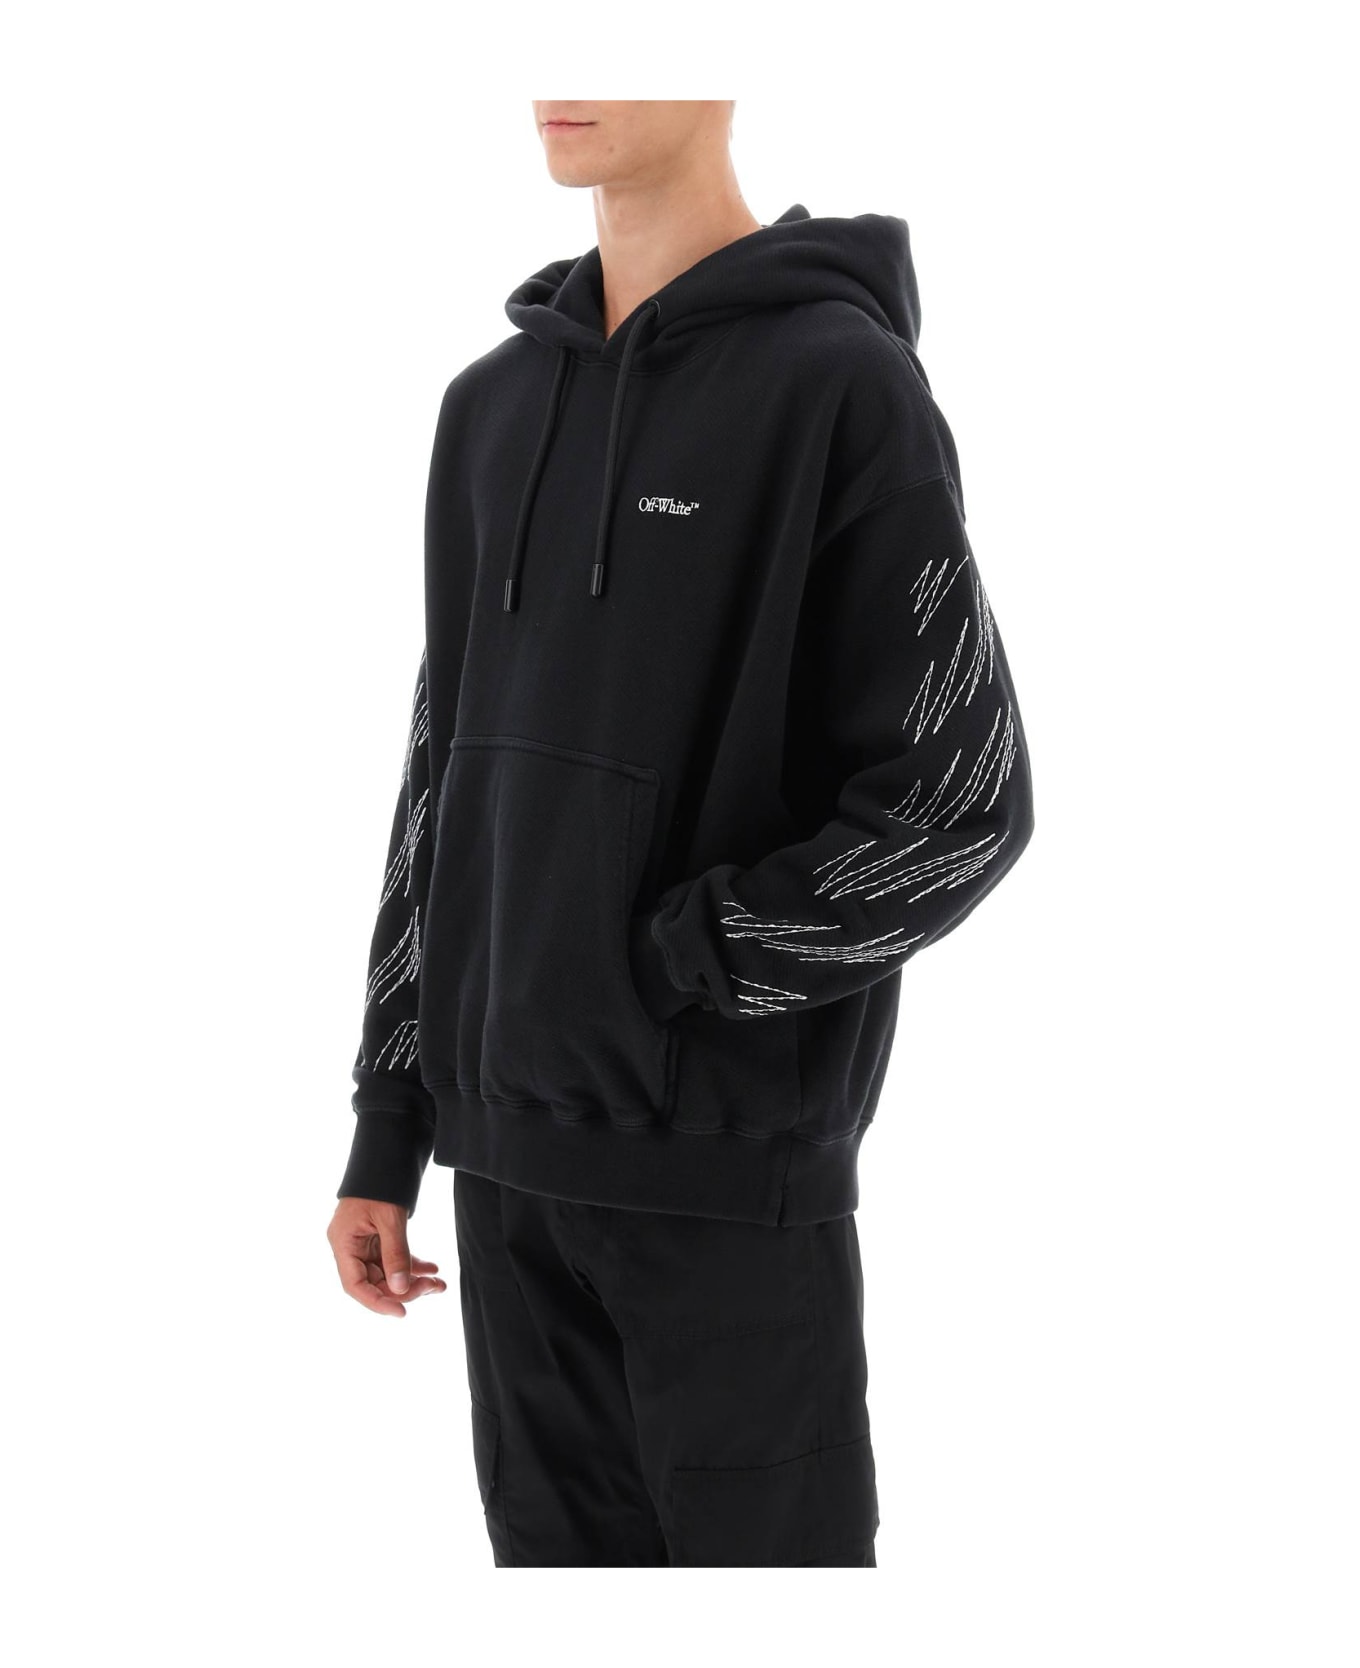 Off-White Hoodie With Contrasting Topstitching - BLACK WHITE (Black)